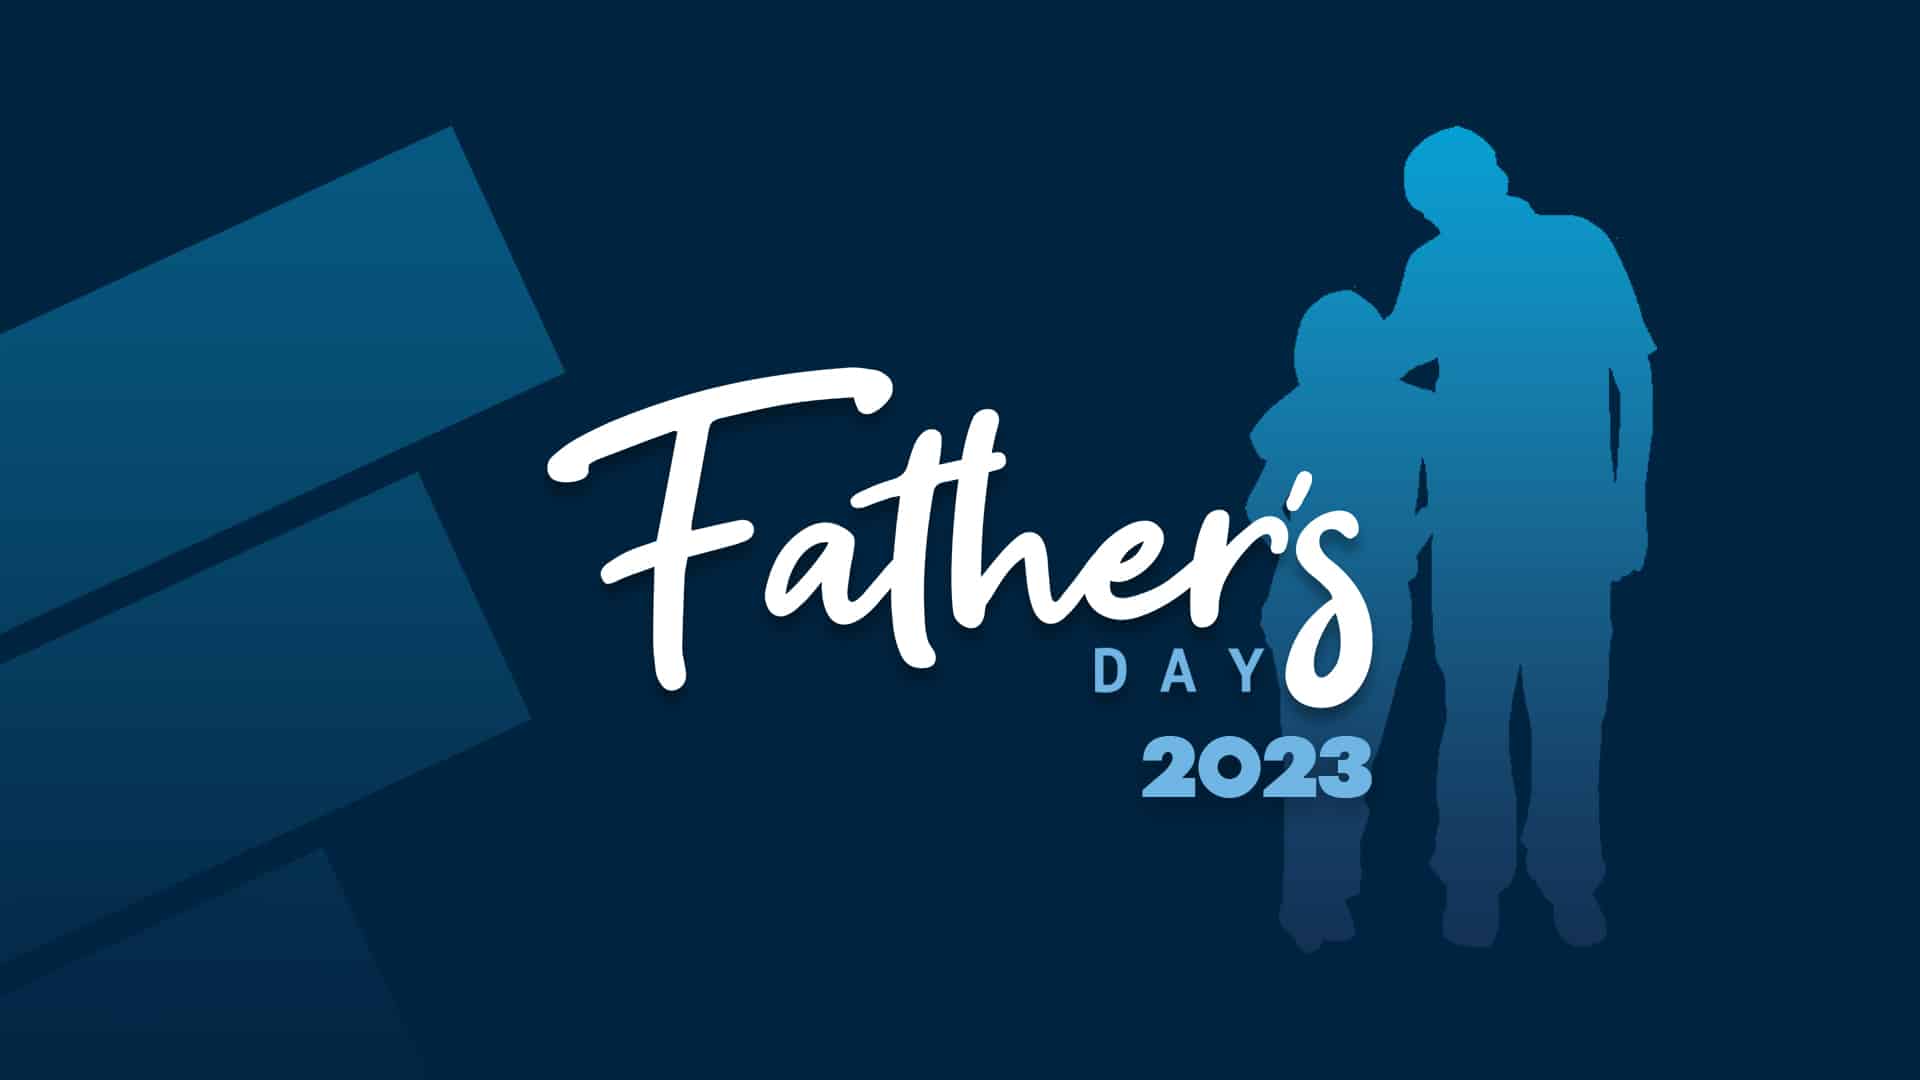 Honor Fathers Day 2023